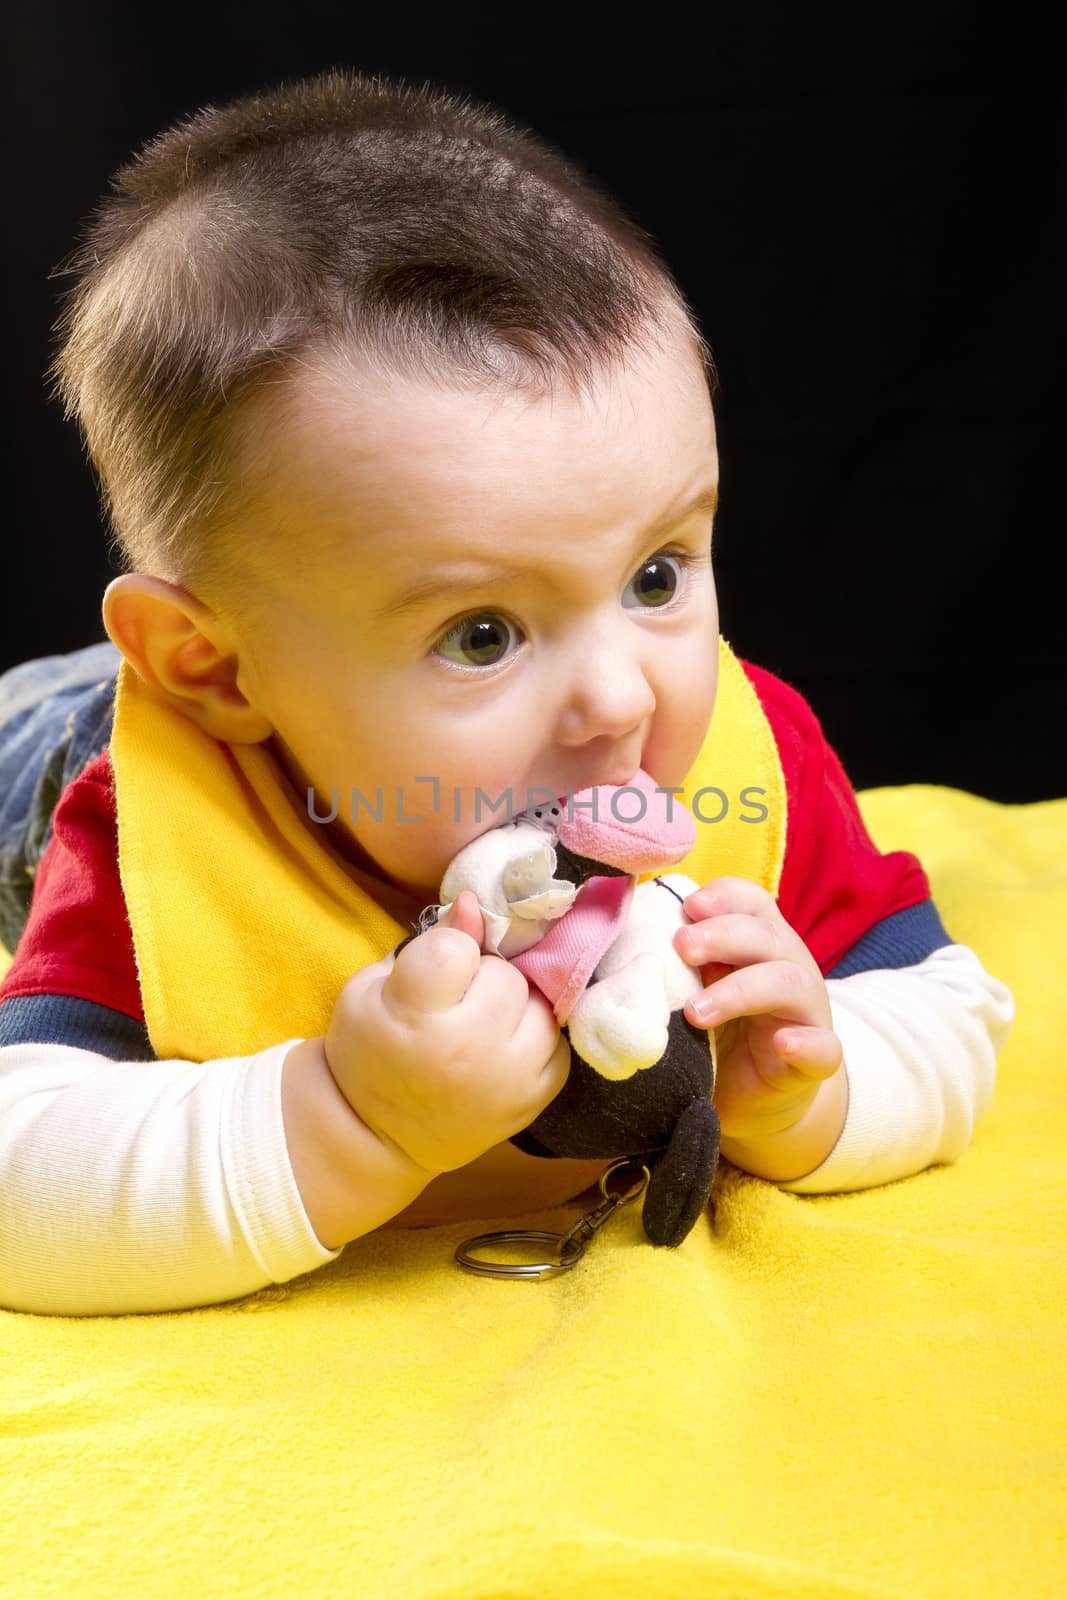 Baby boy with toy on yellow blanket 